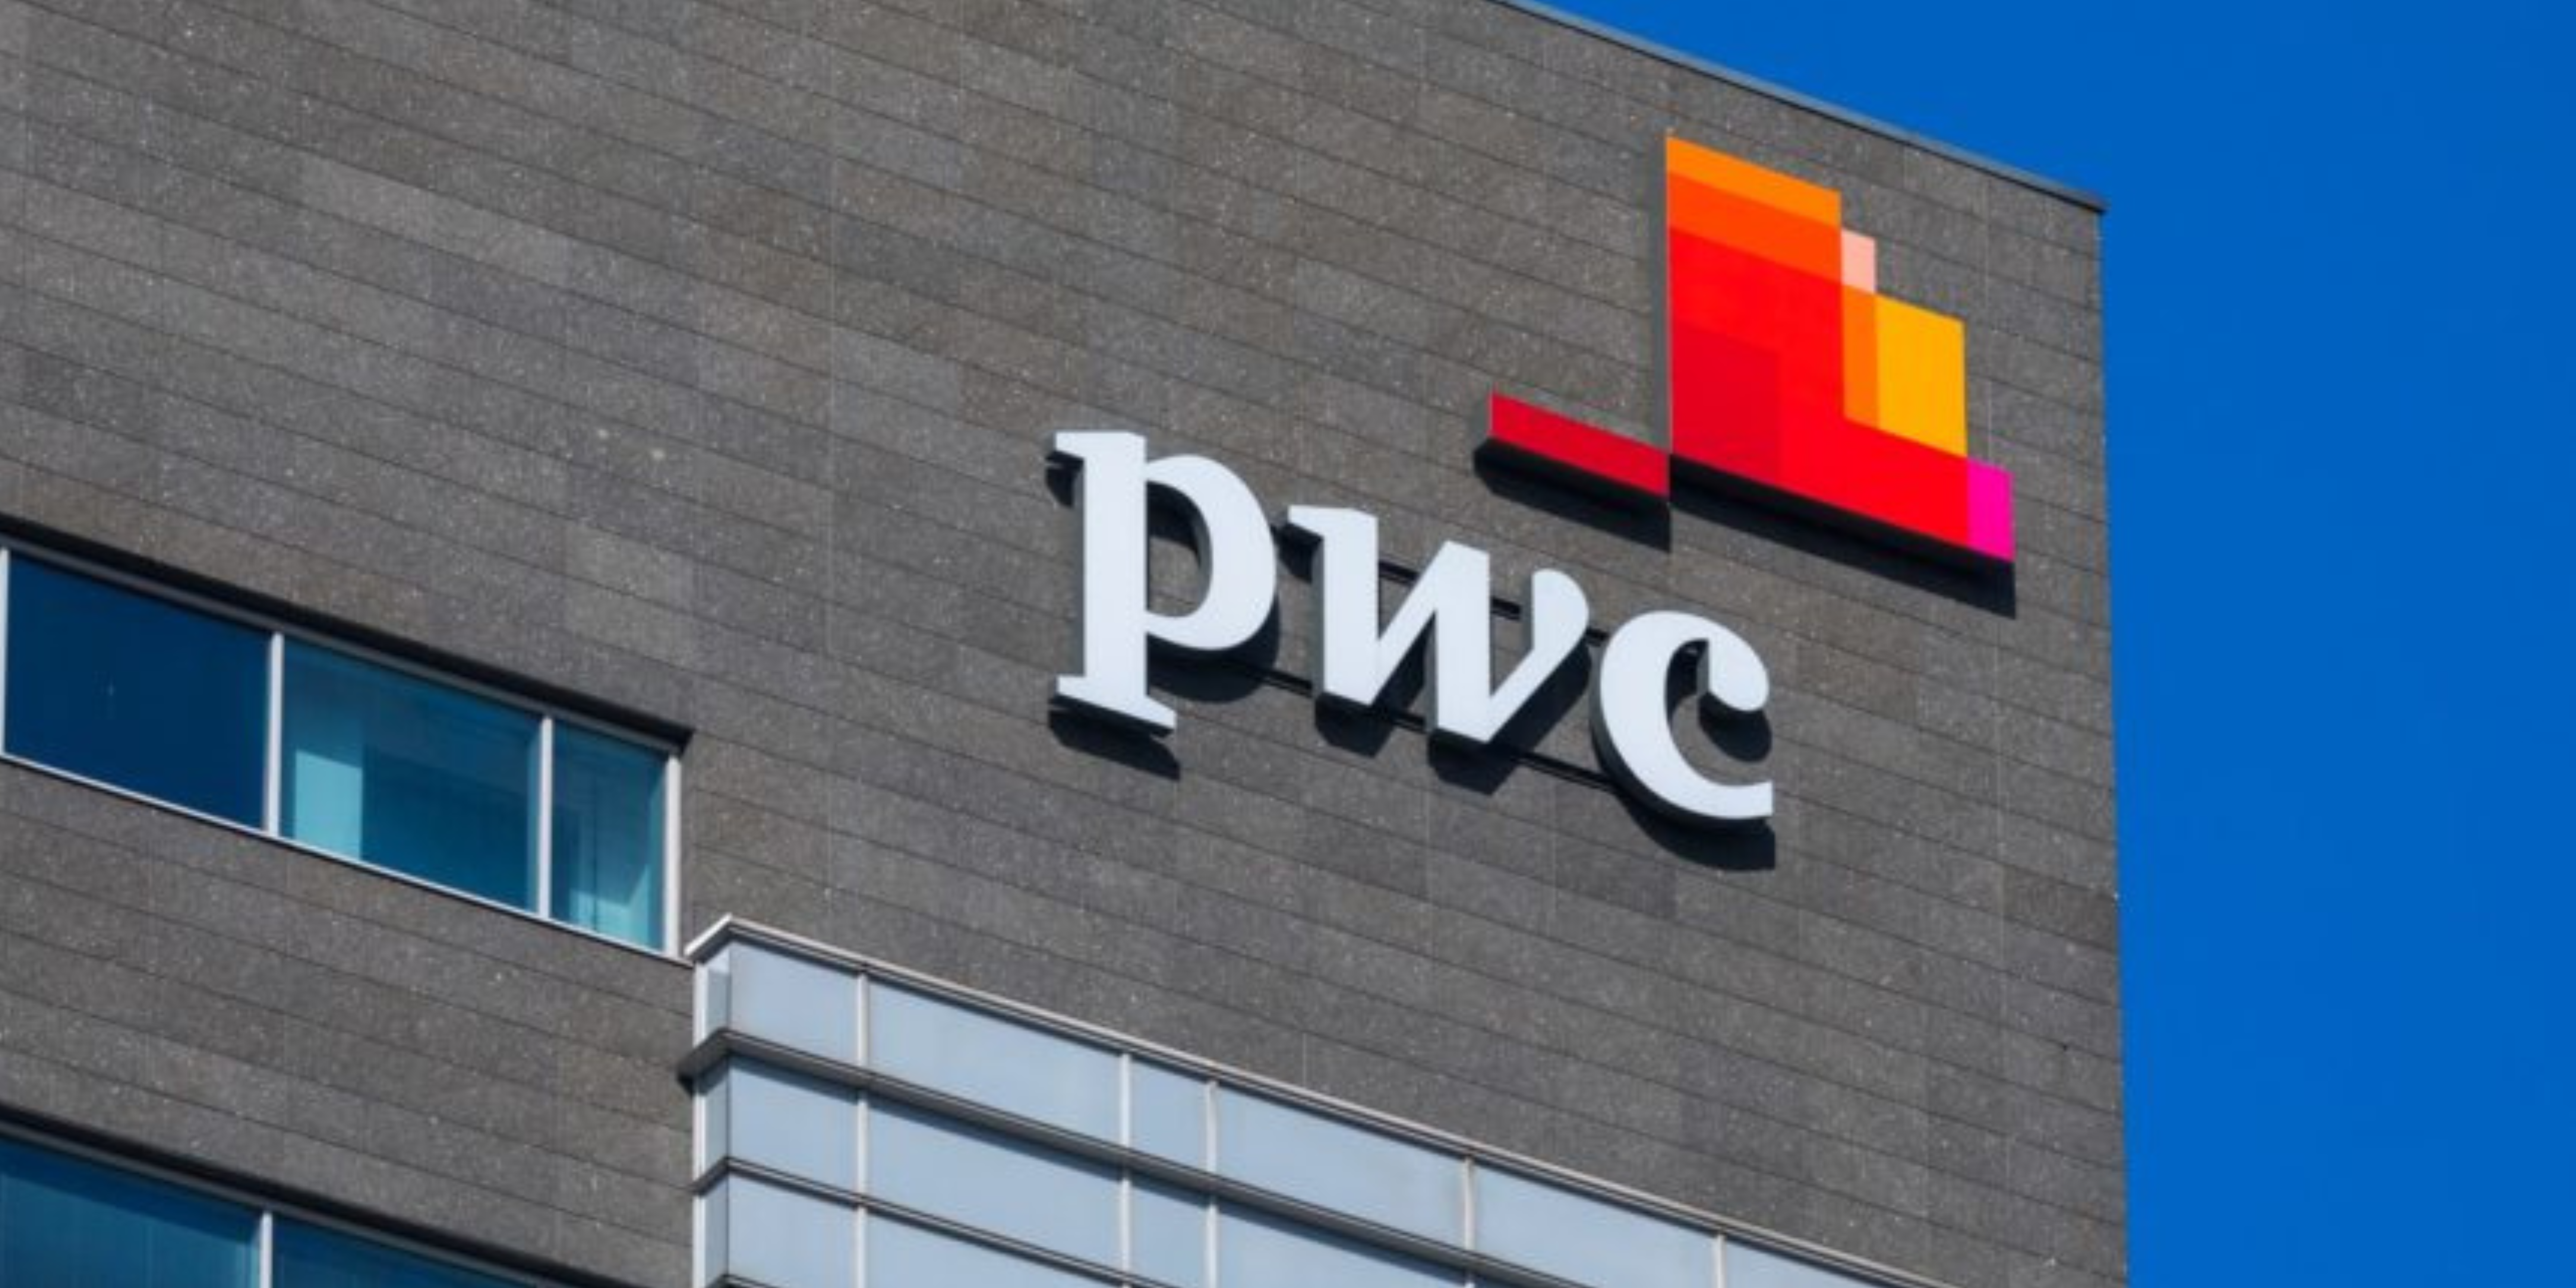 PwC India to Hire 10,000 People over Next 3-4 Years